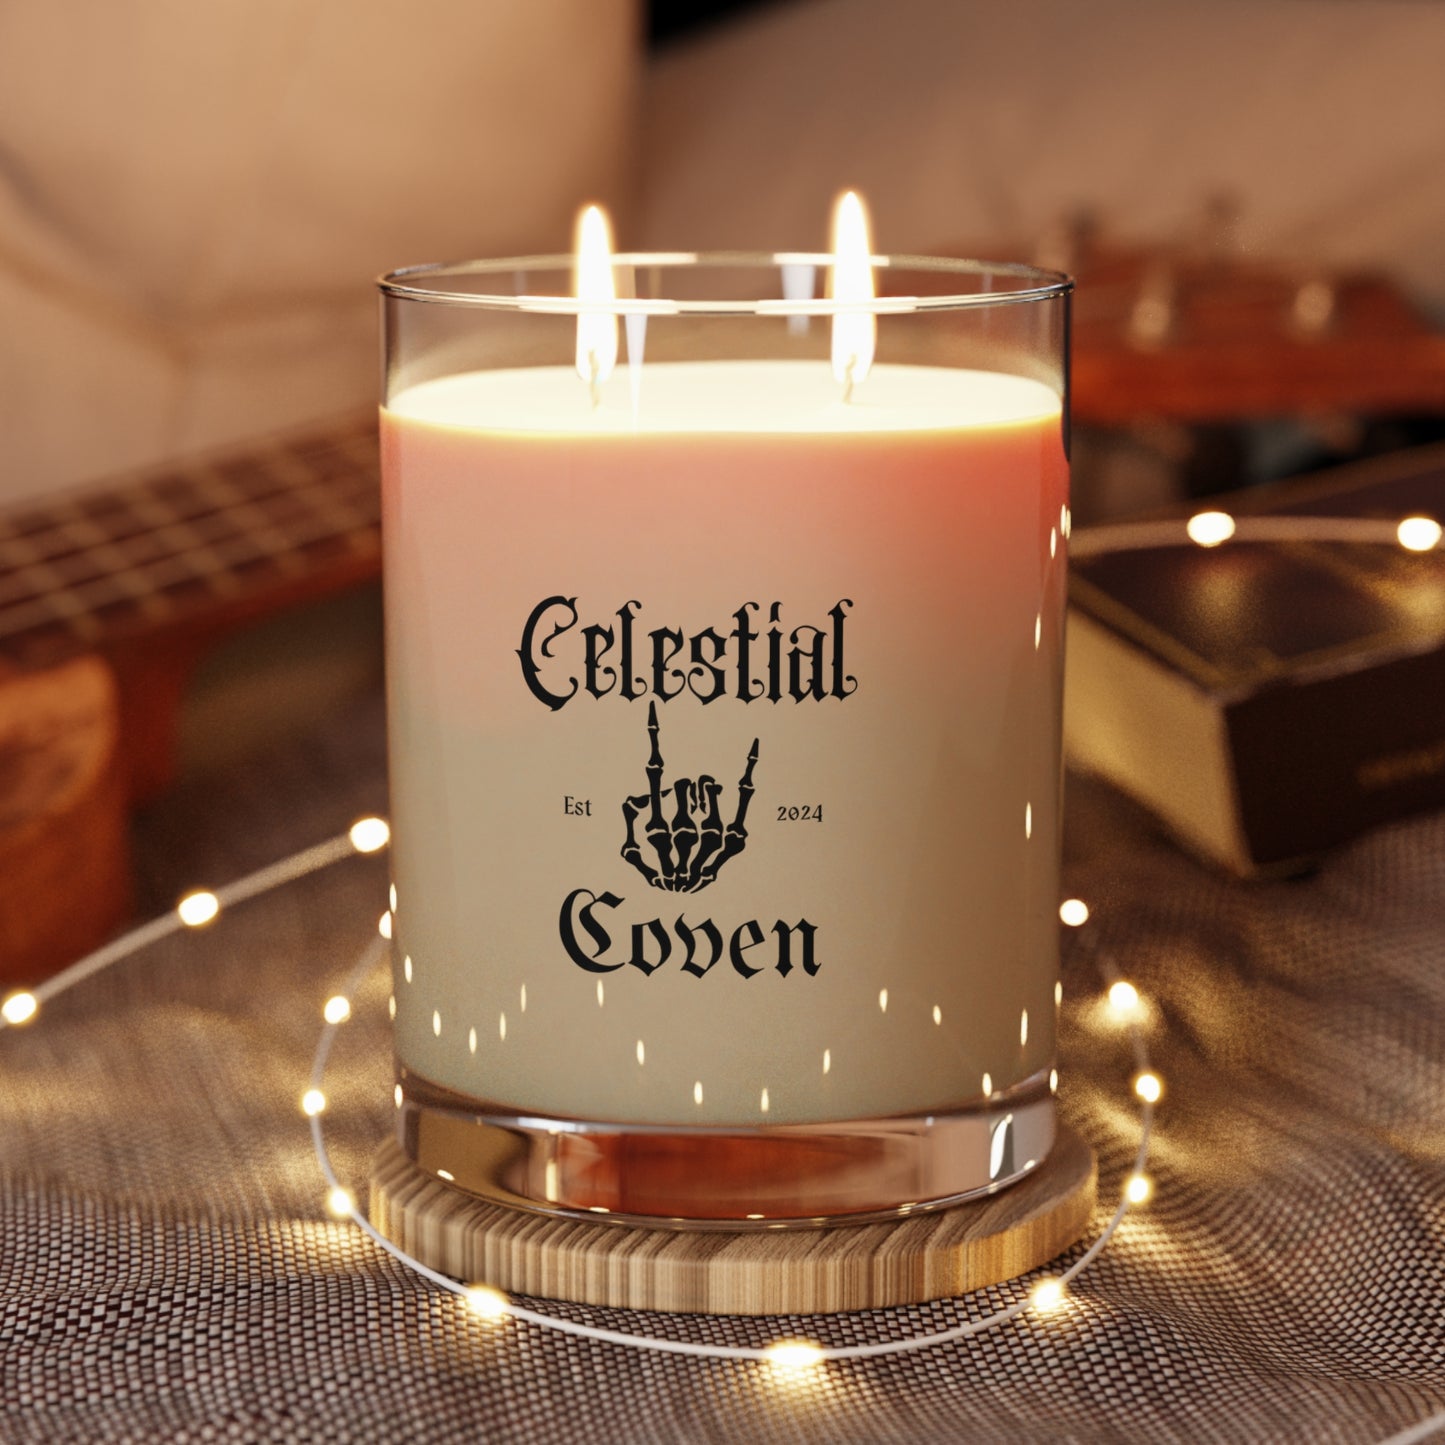 Celestial Coven Scented Candle